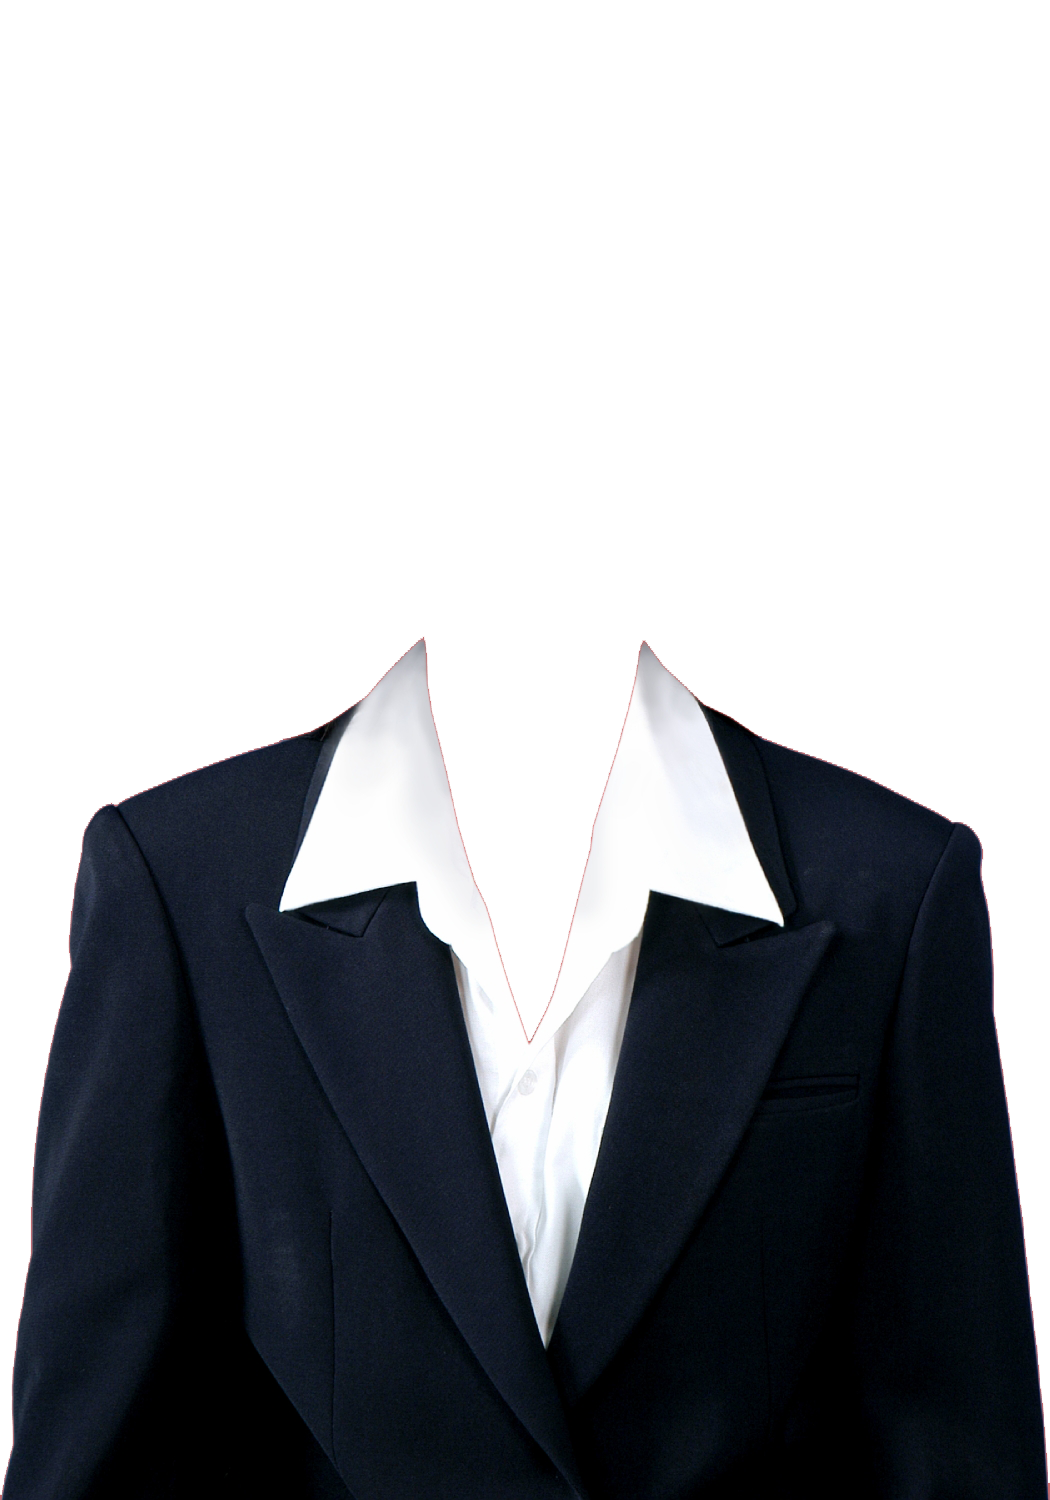 Women In Suit Png Image Purepng Free Transparent Cc0 Png Image Library ...